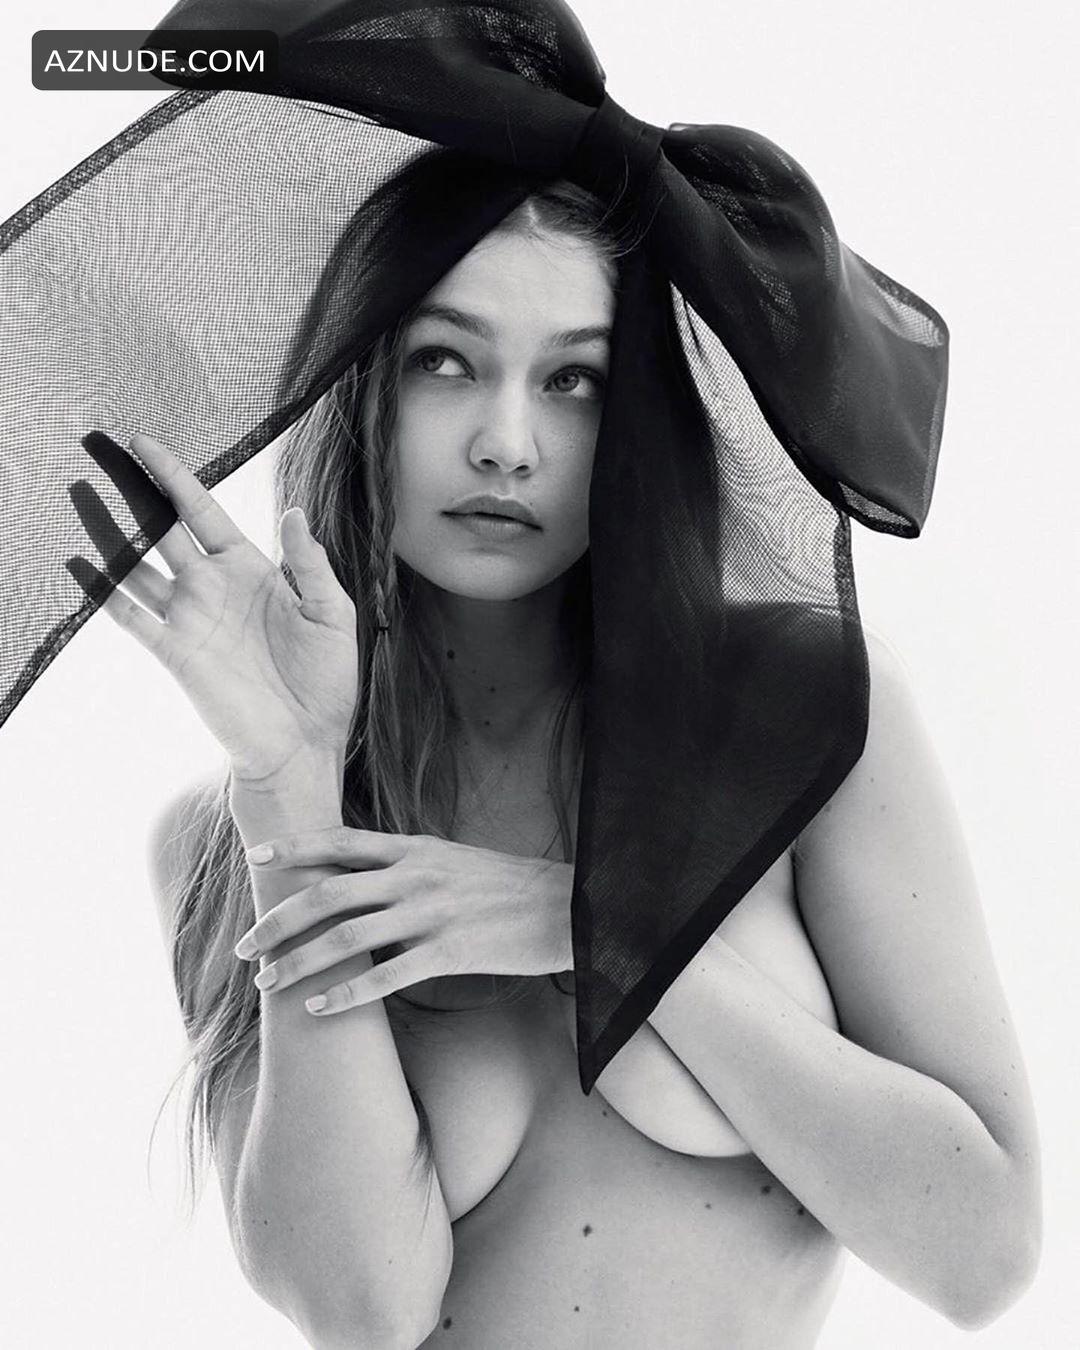 Gigi Hadid Appeared Naked In The Russian Edition Of Vogue Magazine February 2020 Issue Aznude 8514